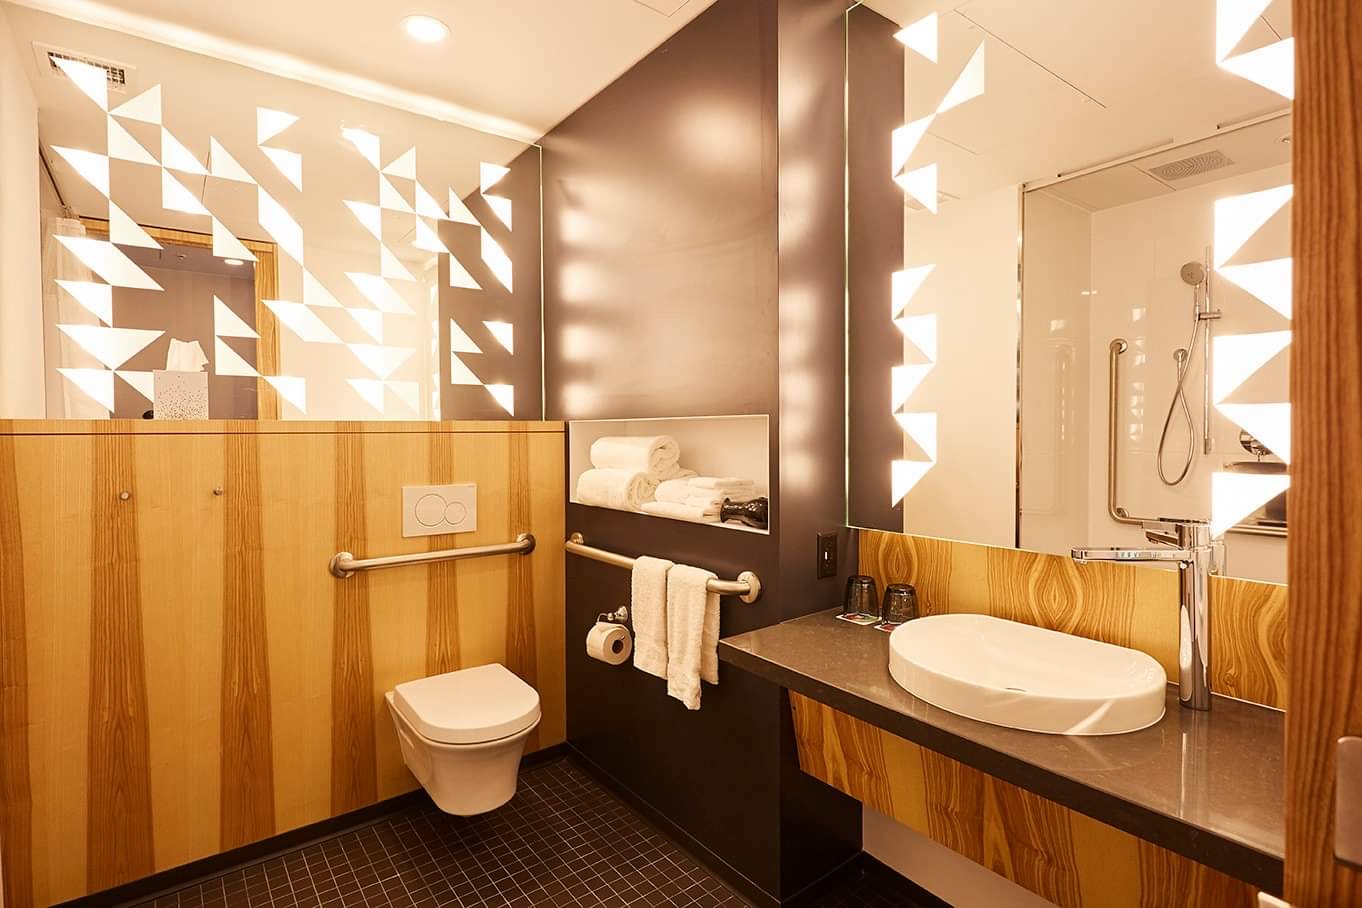 A photo of one side of the washroom in the accessible rooms at the Alt. Lots of space, a counter you can wheel under with a large mirror above it, a toilet in the corner with grab bars behind and to the side.